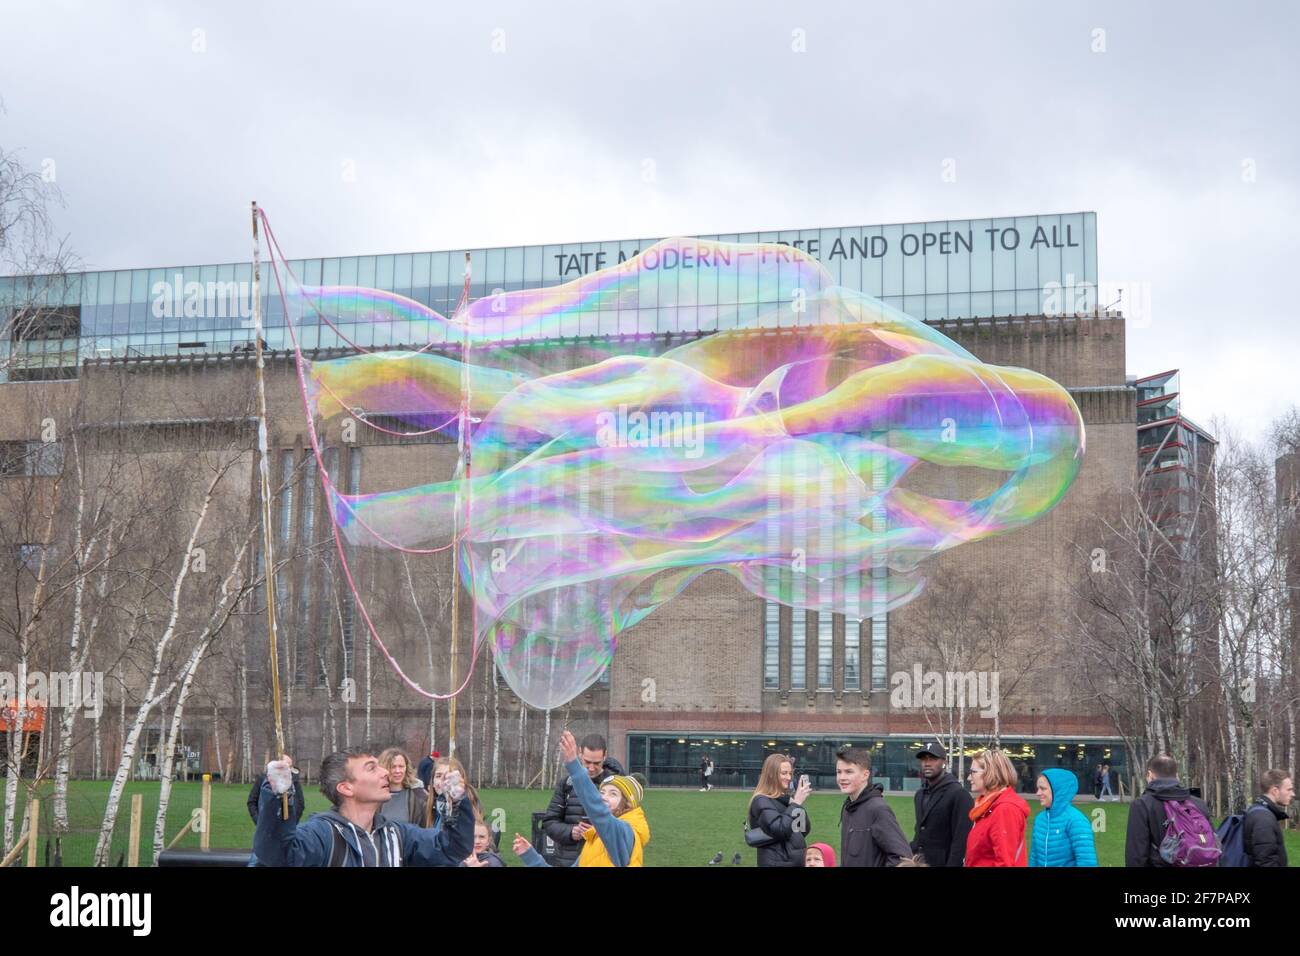 London, England, United Kingdom - March 15, 2020 - People entertained by man with giant bubbles outside Tate Modern Gallery for art on the South Bank Stock Photo